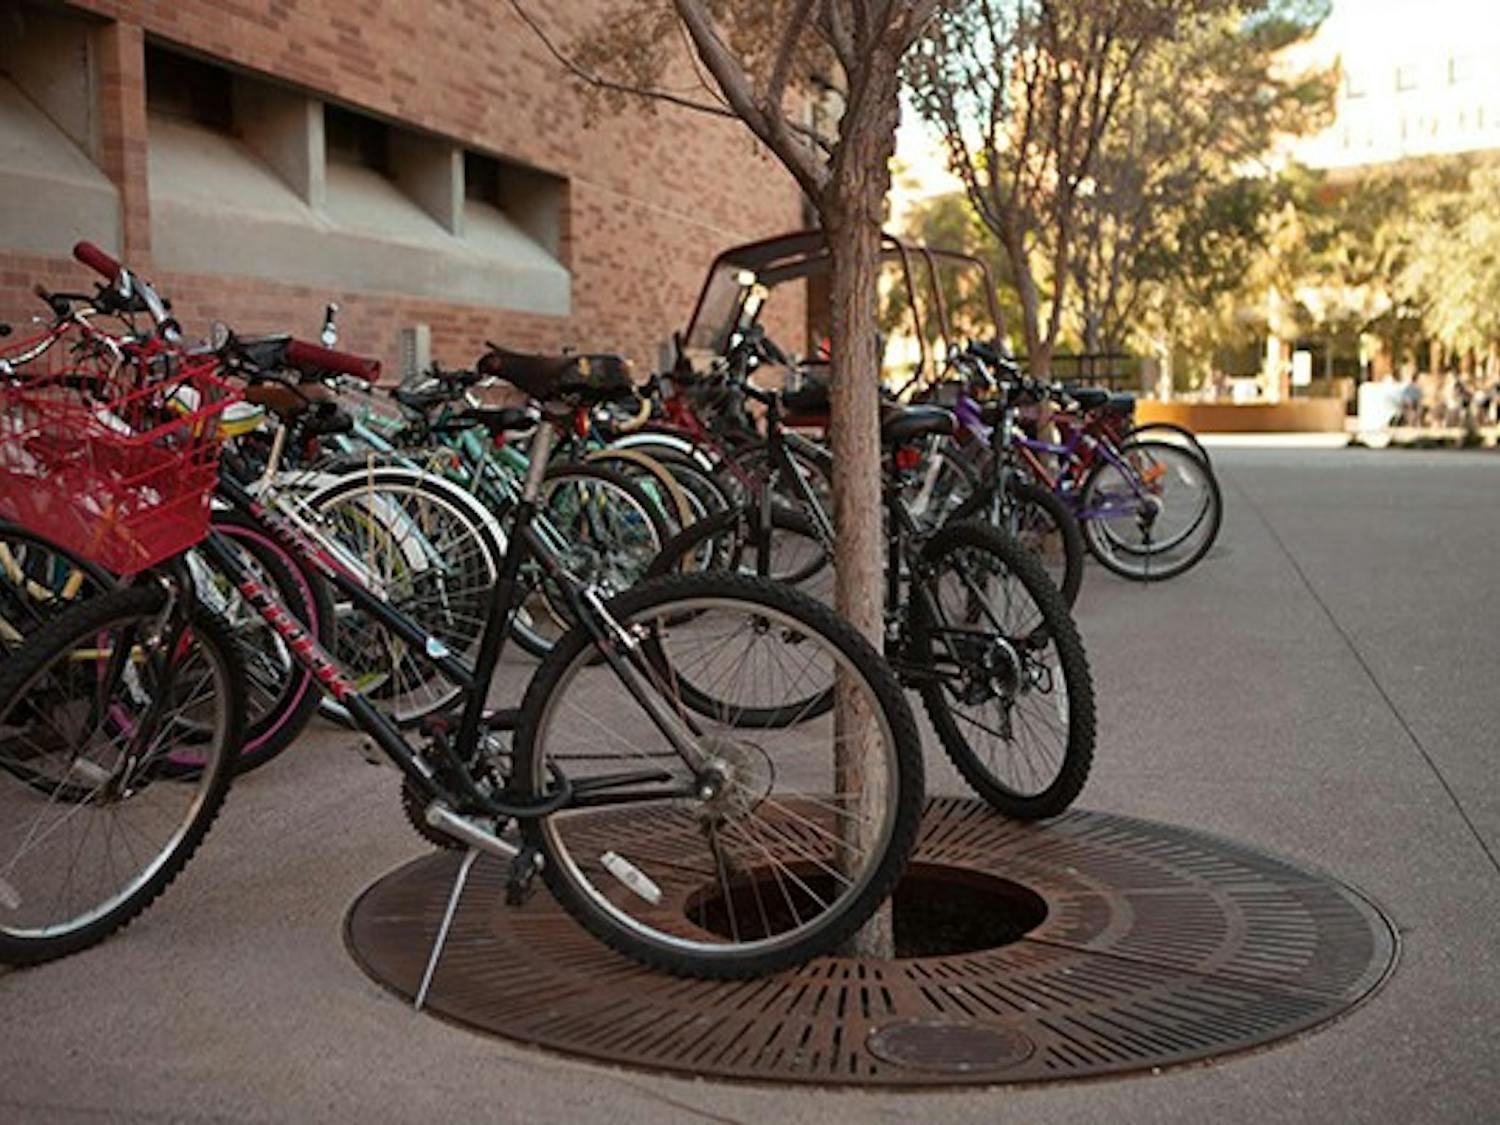 Bikes along the W.P. Carey building are locked onto itself or each other due to the insufficiency of bike racks in ASU. ASU was recently named one of the most bike-friendly campuses across the nation. However, Very often students can't find a bike rack and have to lock their bikes to the trees and fences. (Photo by Ryan Liu)